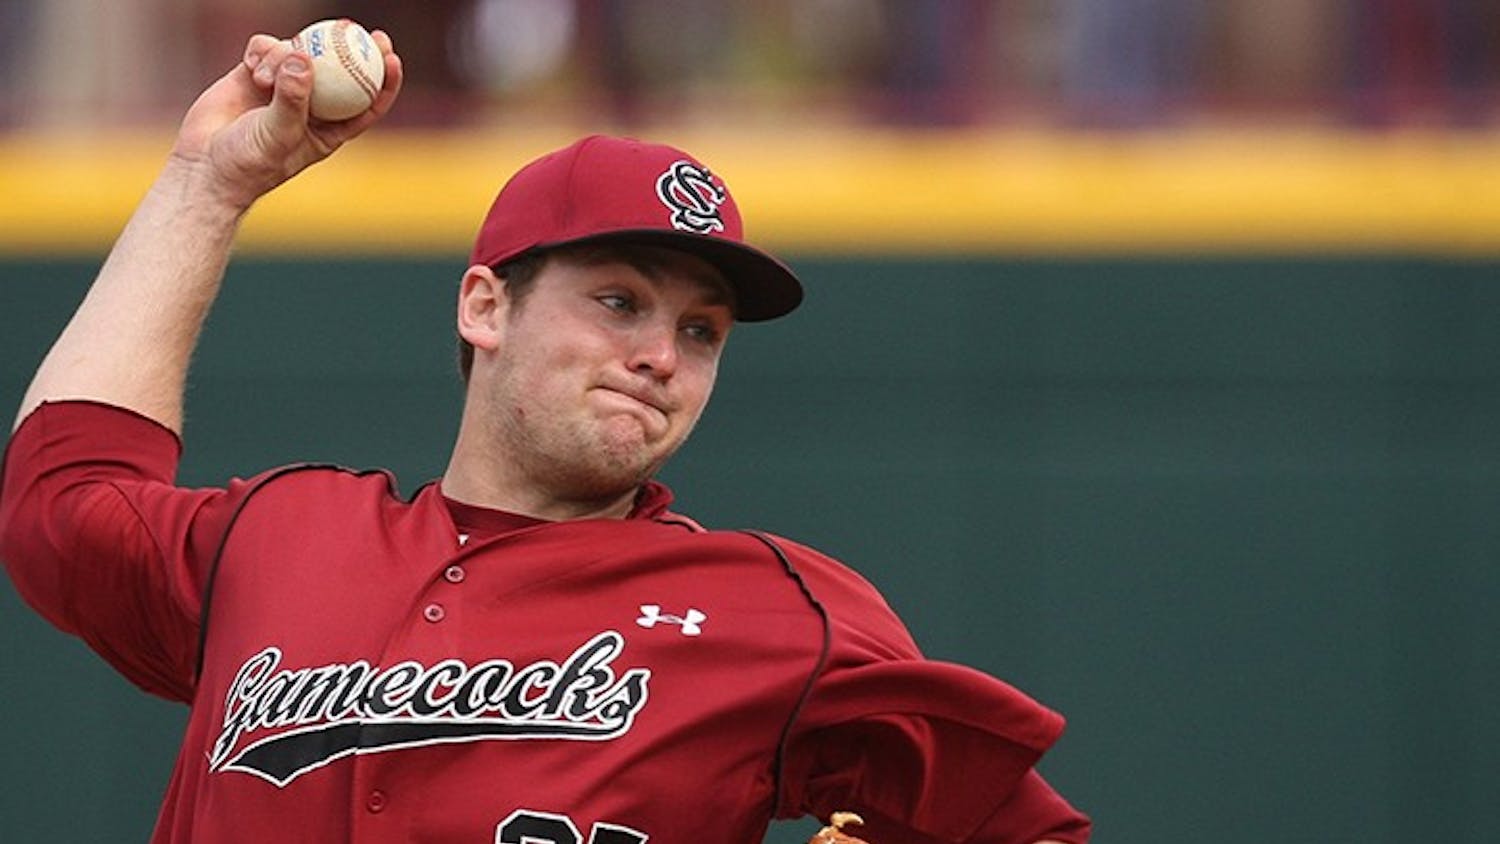 South Carolina Gamecocks starting pitcher Wil Crowe pitches against the Eastern Kentucky Colonels in Columbia, S.C., on Sunday, Feb. 23, 2014. (C. Michael Bergen/The State/MCT)